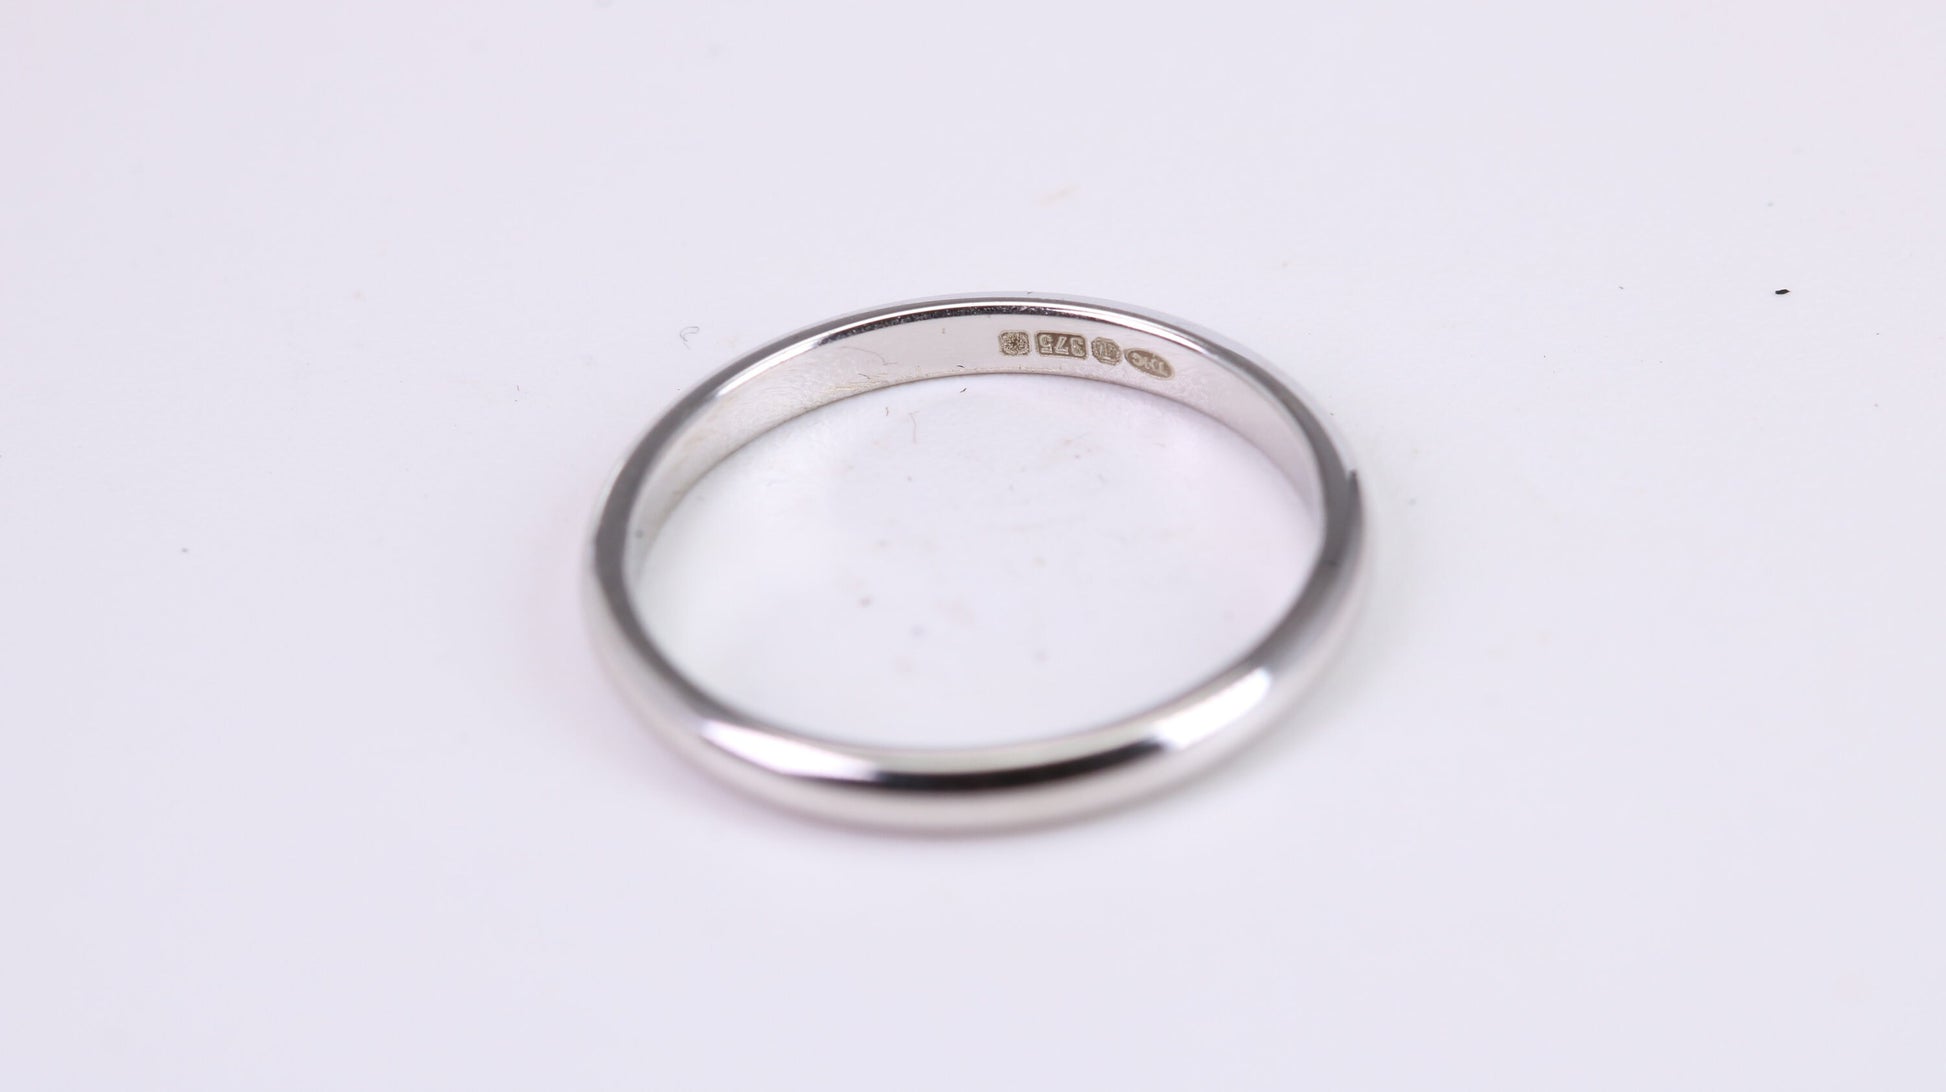 2 mm Wide Simple Traditional D Profile Wedding Band, Made from Solid White Gold, British Hallmarked